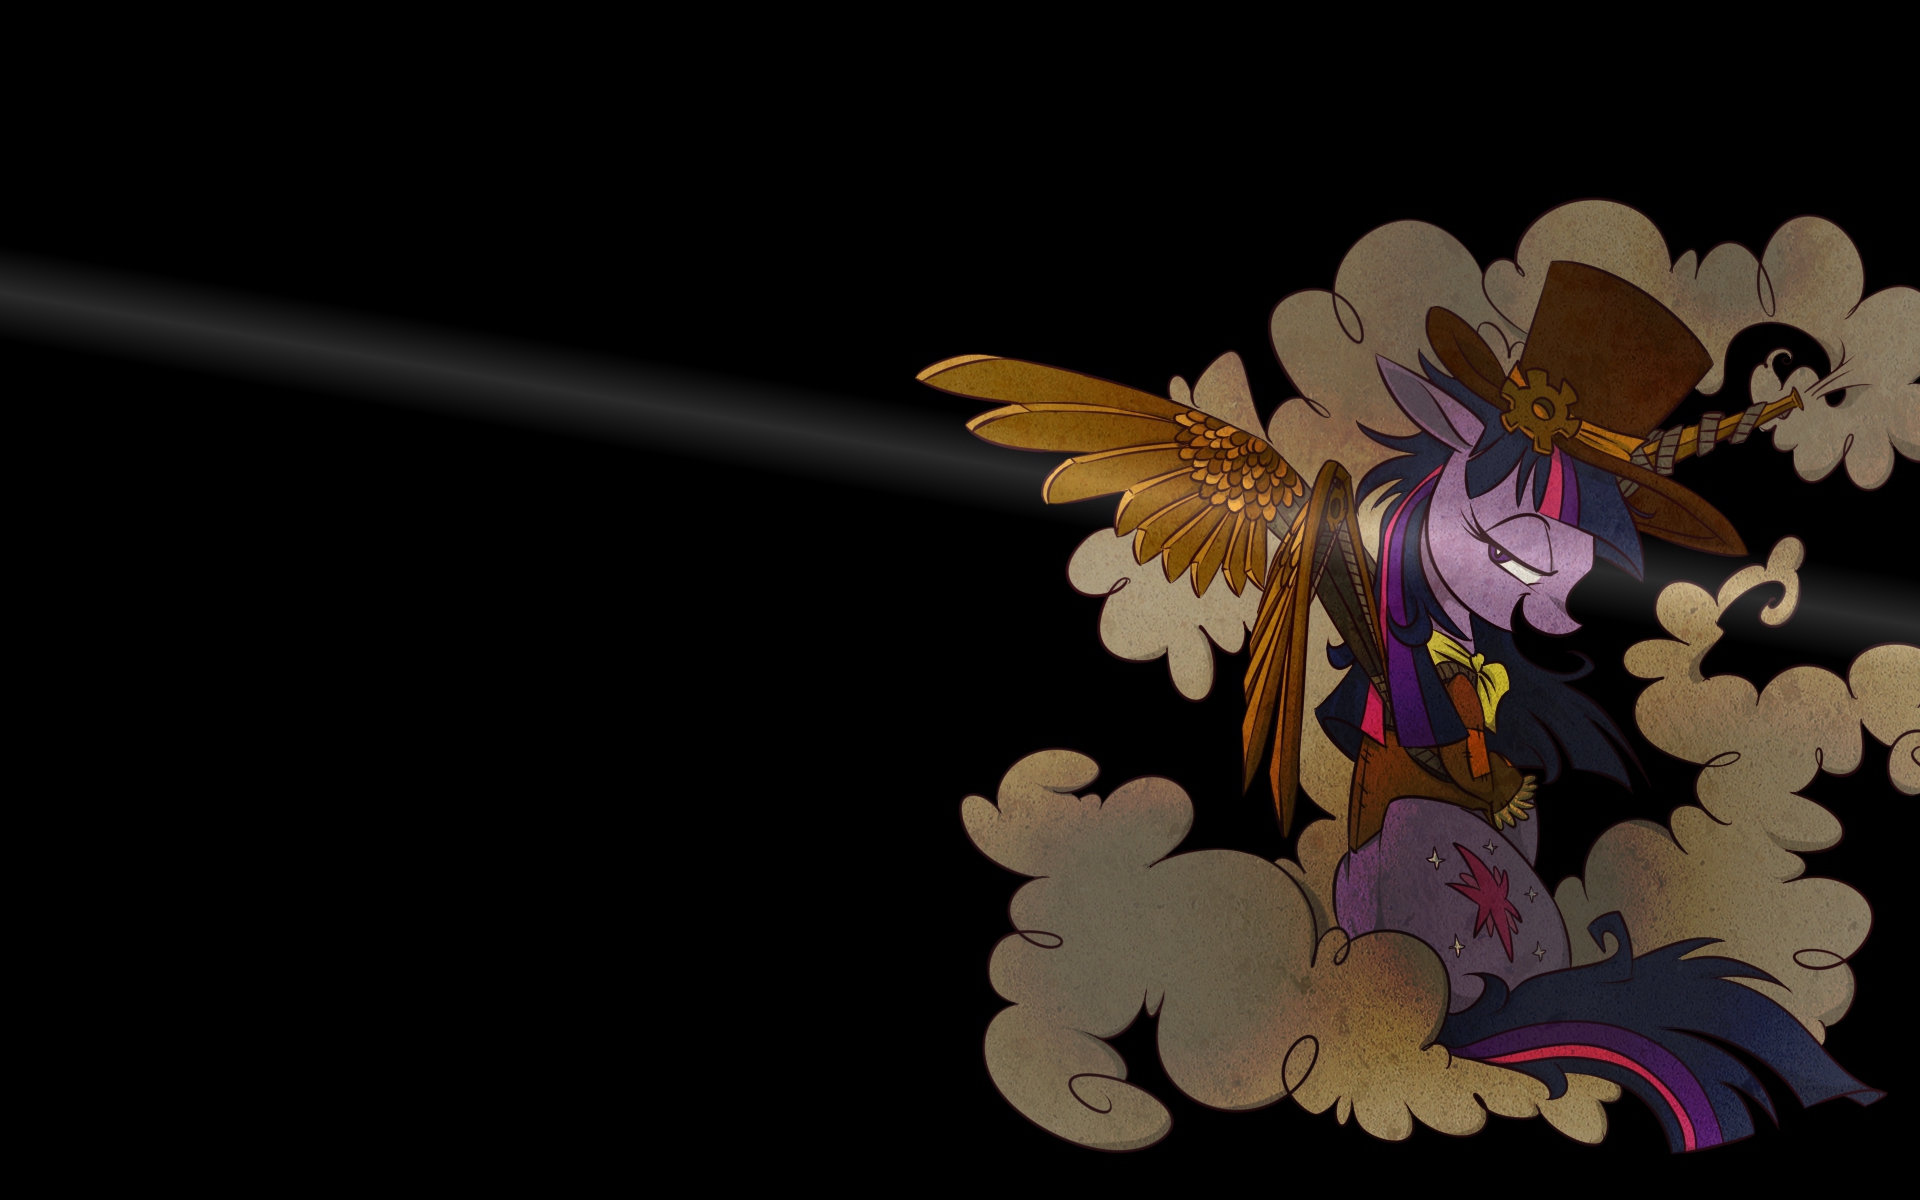 Steampunk Twilight Wallpaper by PashaPup and travischan03